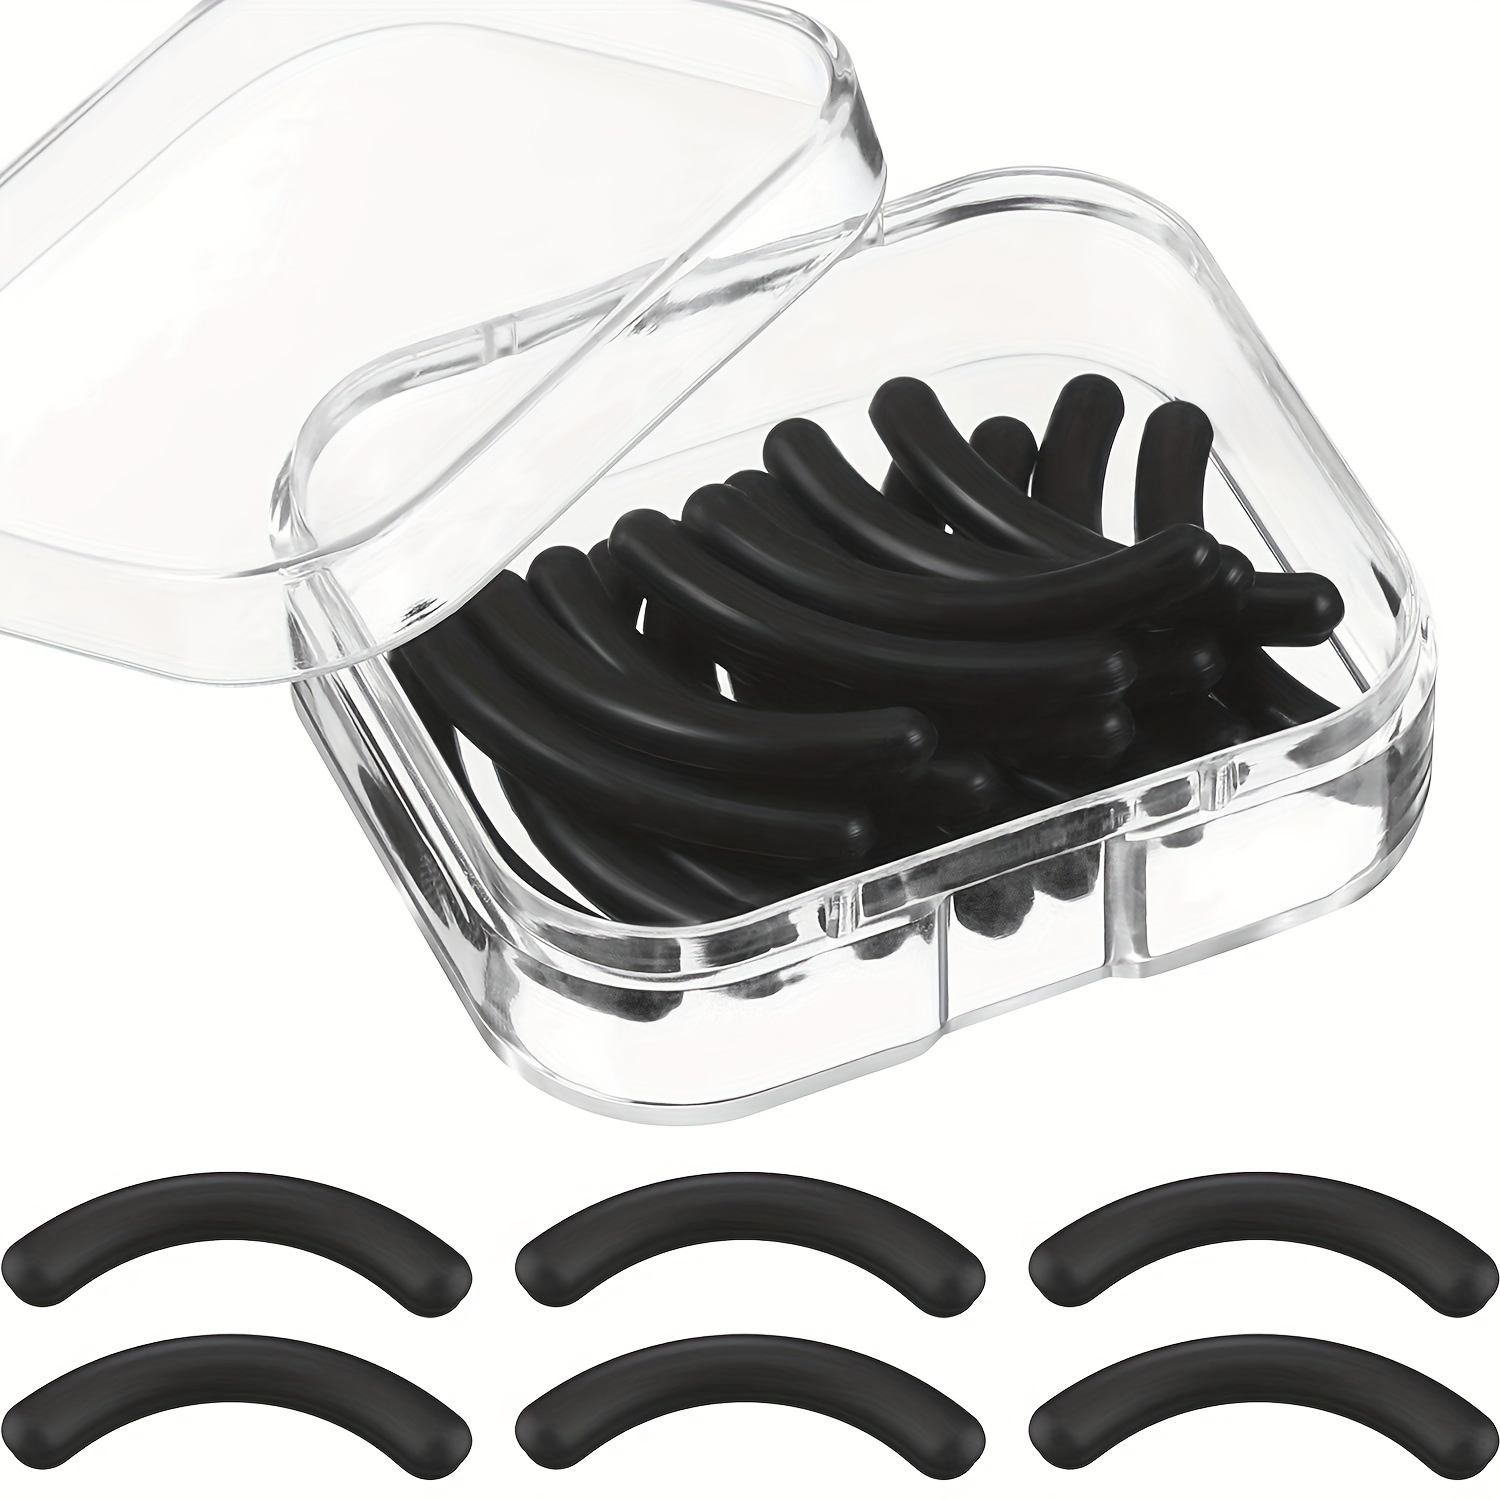 

30 Pcs Universal Eyelash Curler Refill Pads - Silicone Rubber Replacements For Long-lasting, Smooth Application - Clear Storage Box Included (black)